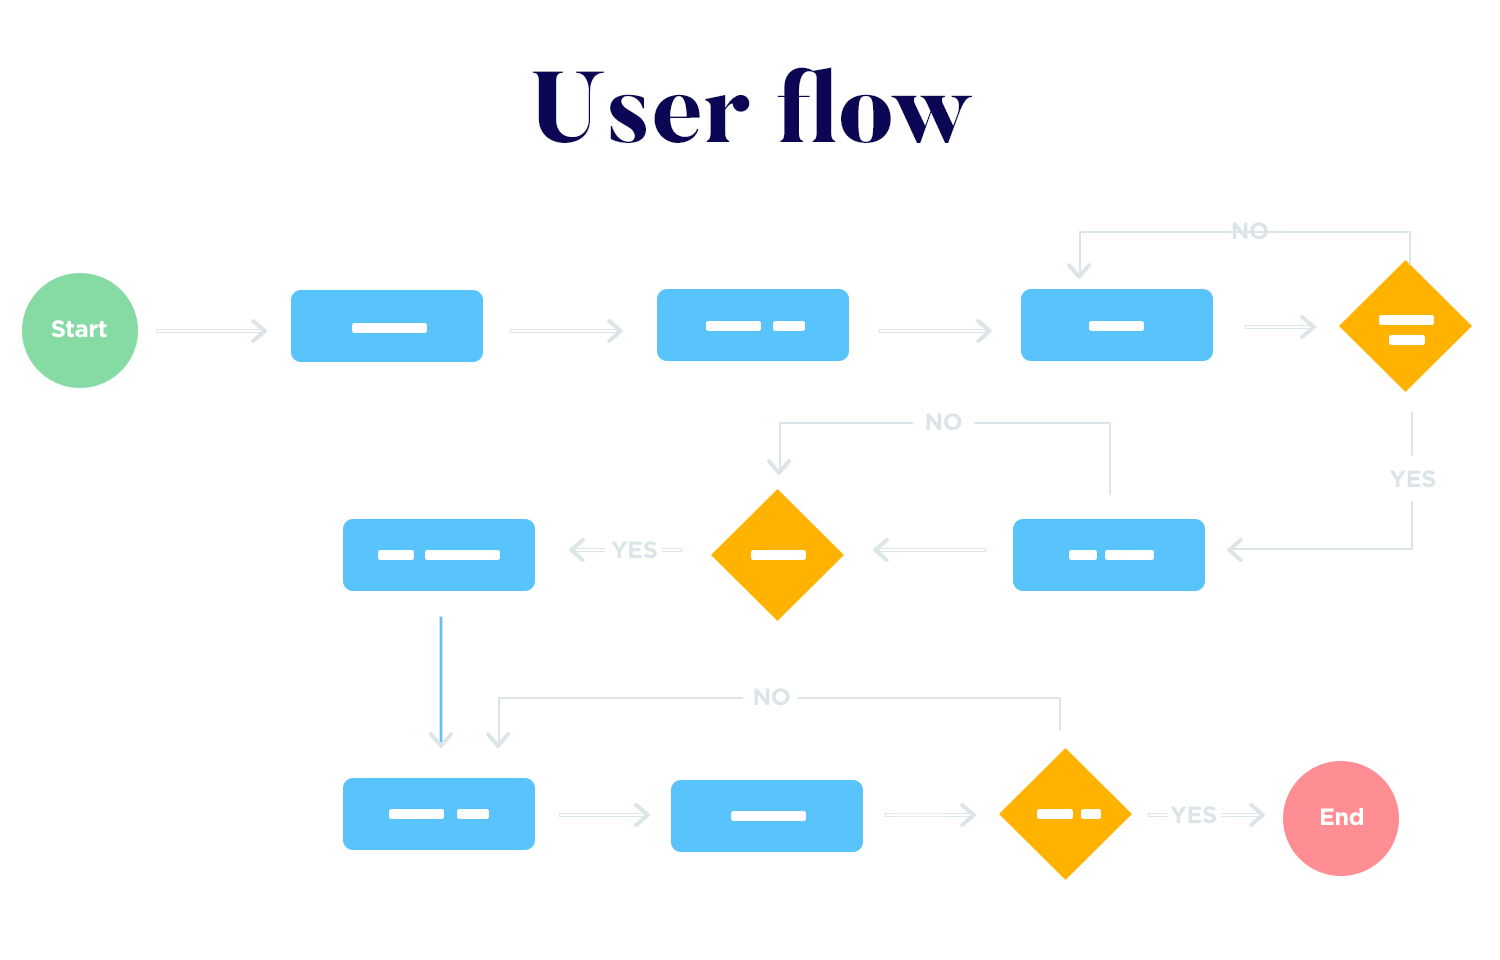 Functional specification documents - user flow of an ecommerce